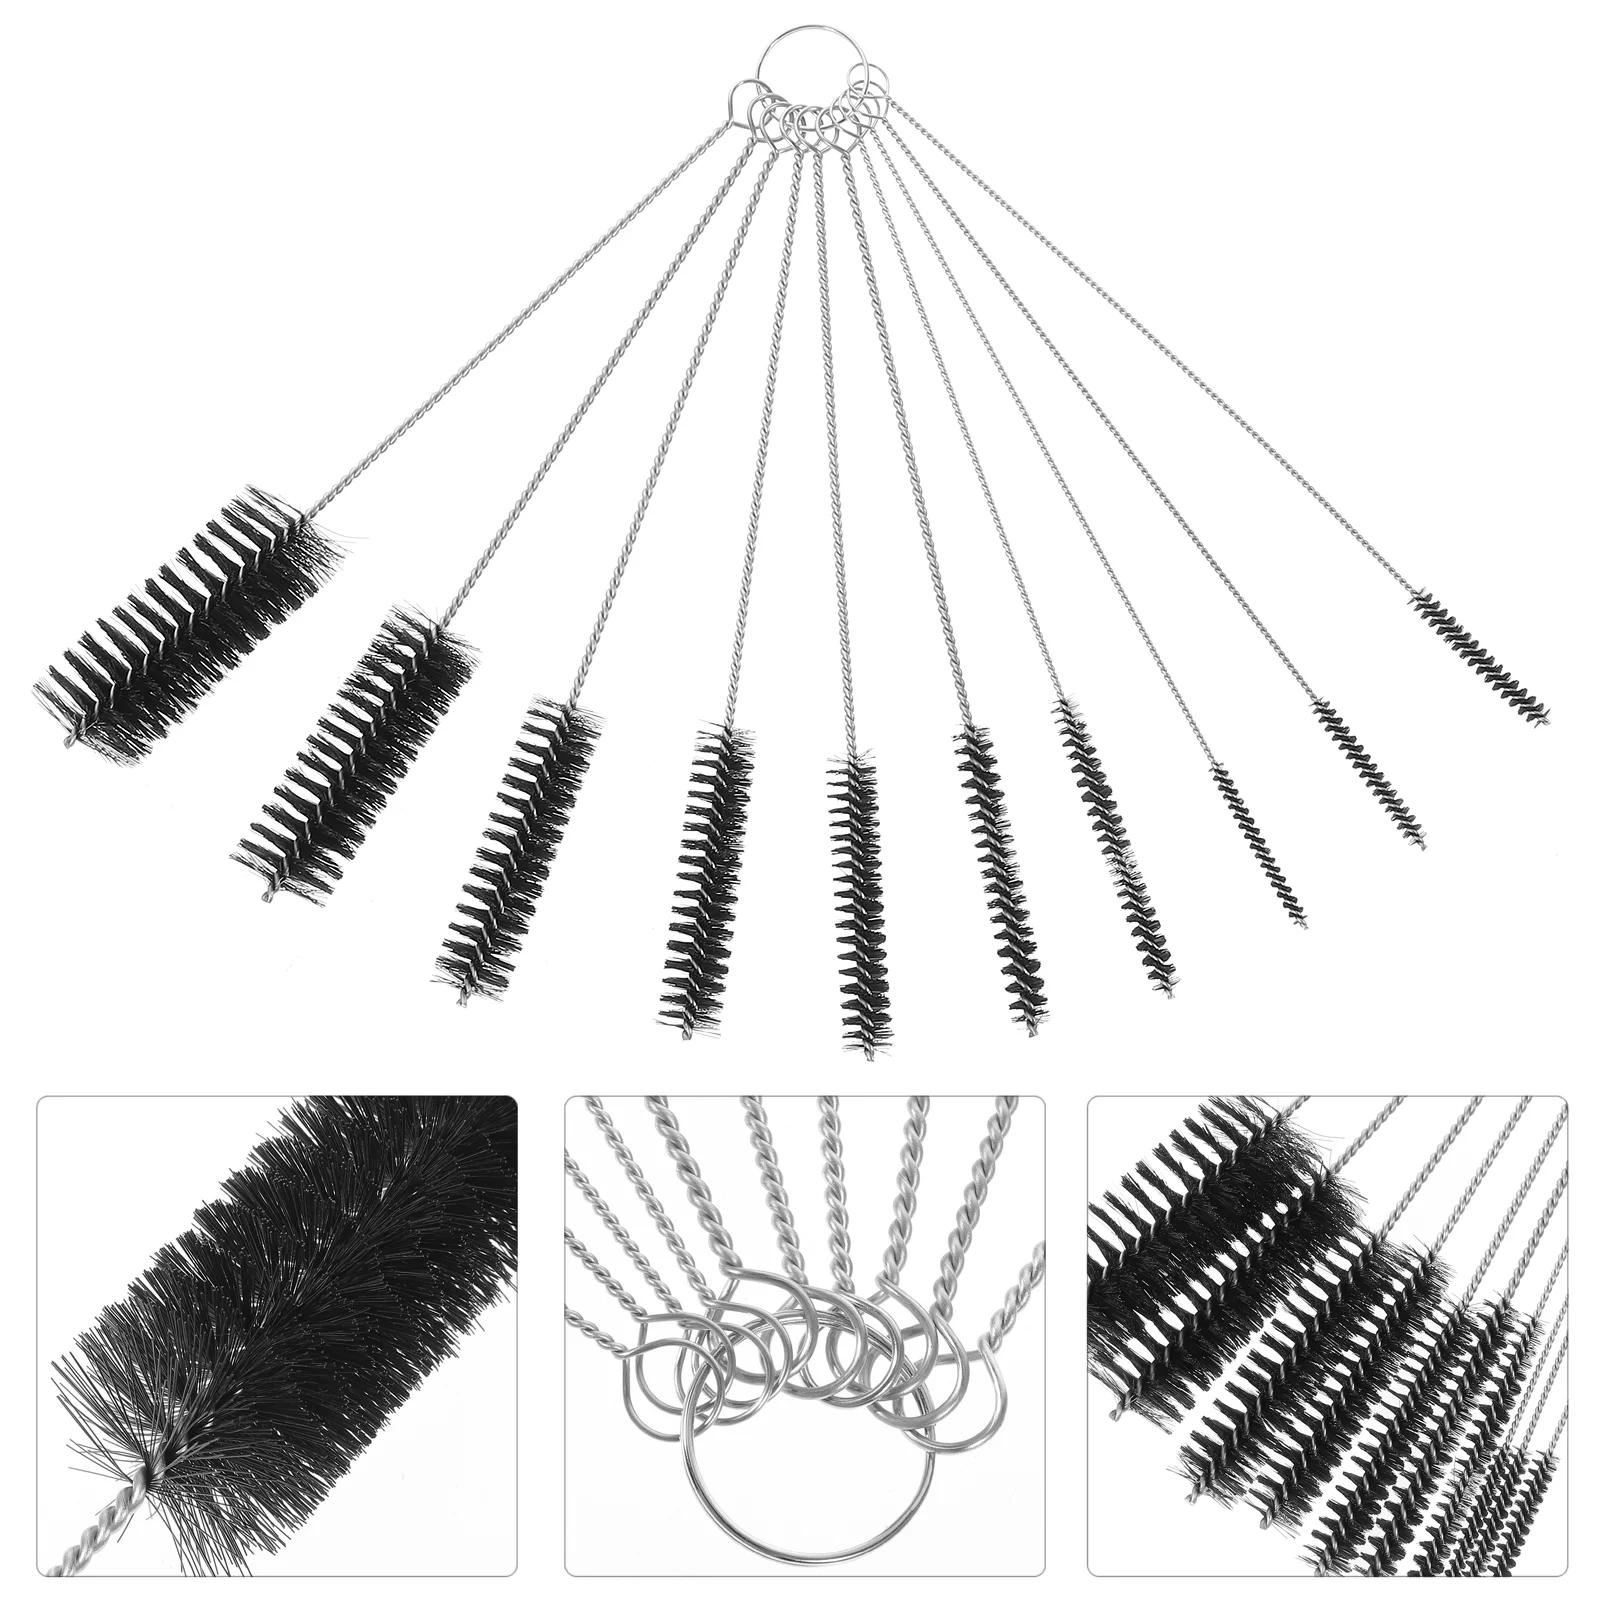 

Pipe Cleaning Brush Set- 10 Different Diameters Nylon Tube Brushes for Drinking Straws Glasses Keyboards Dining room sets